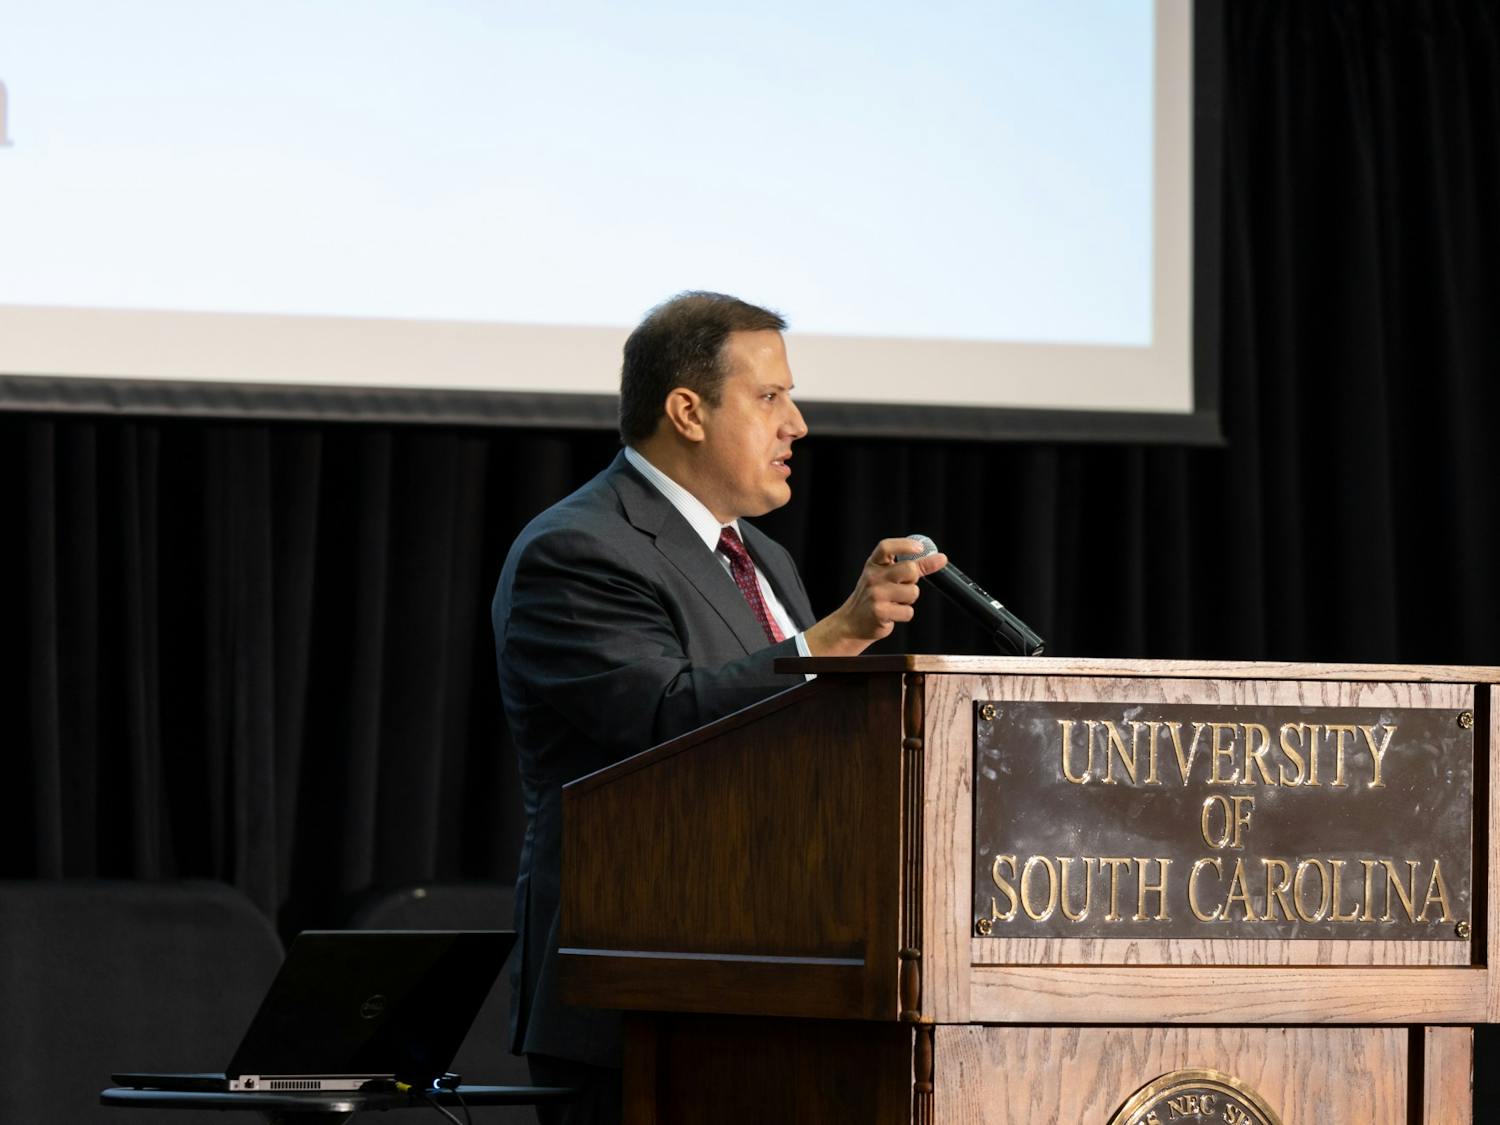 Thad Westbrook, chairman of the University of South Carolina Presidential Search Committee, speaks at a town hall Thursday. The committee hosted the town hall so members of the public could have their voices heard.